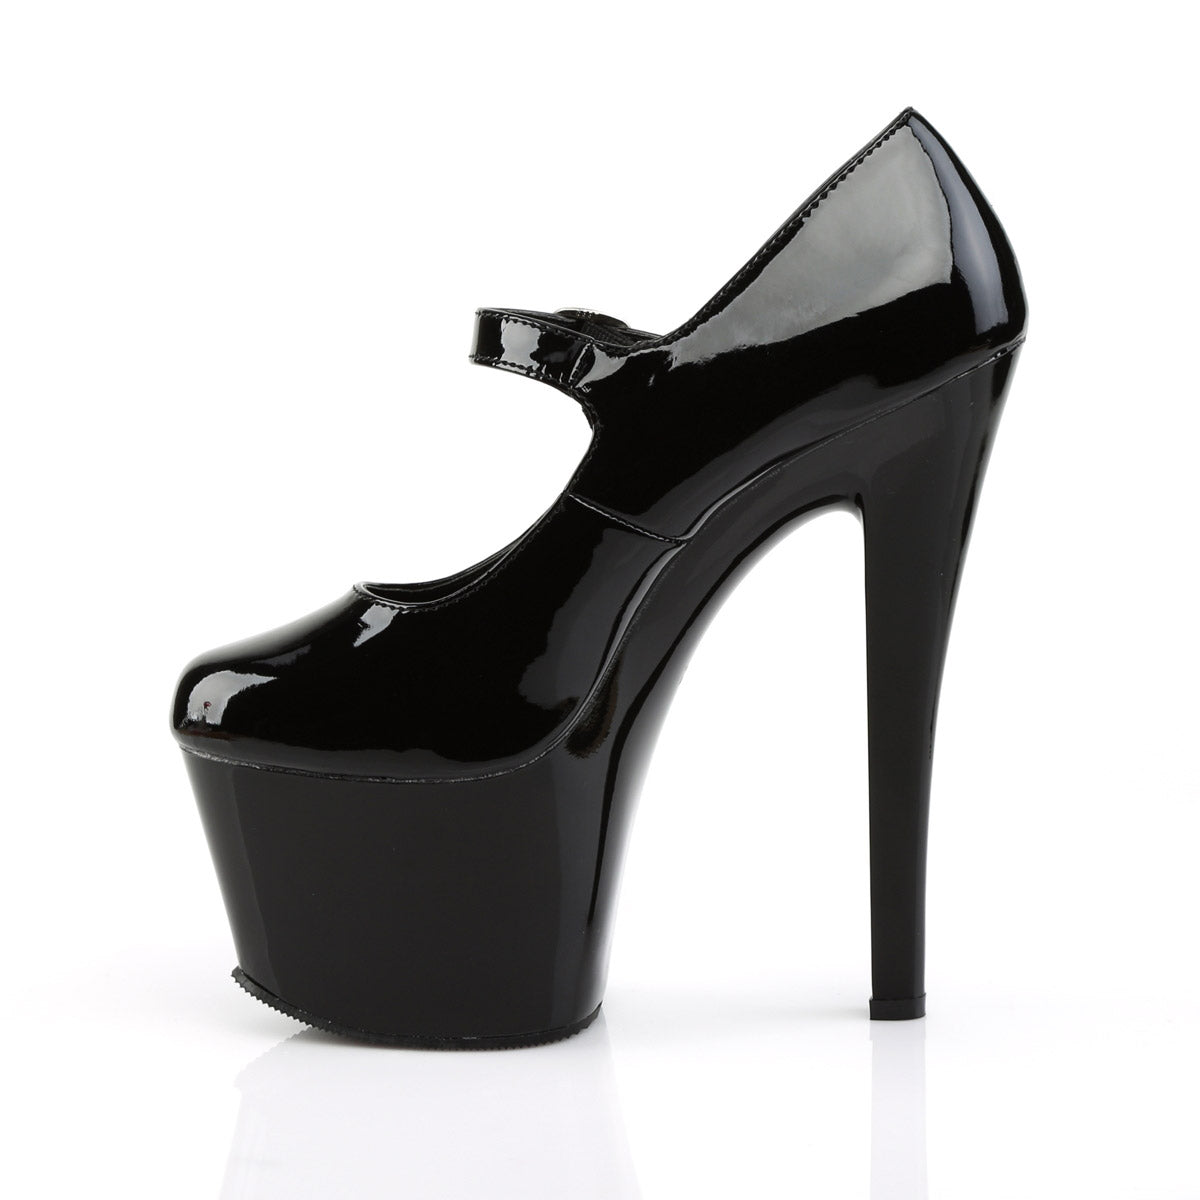 Sexy Platform Stiletto Classic Mary Jane Pumps High Heels Shoes Pleaser Pleaser SKY/387